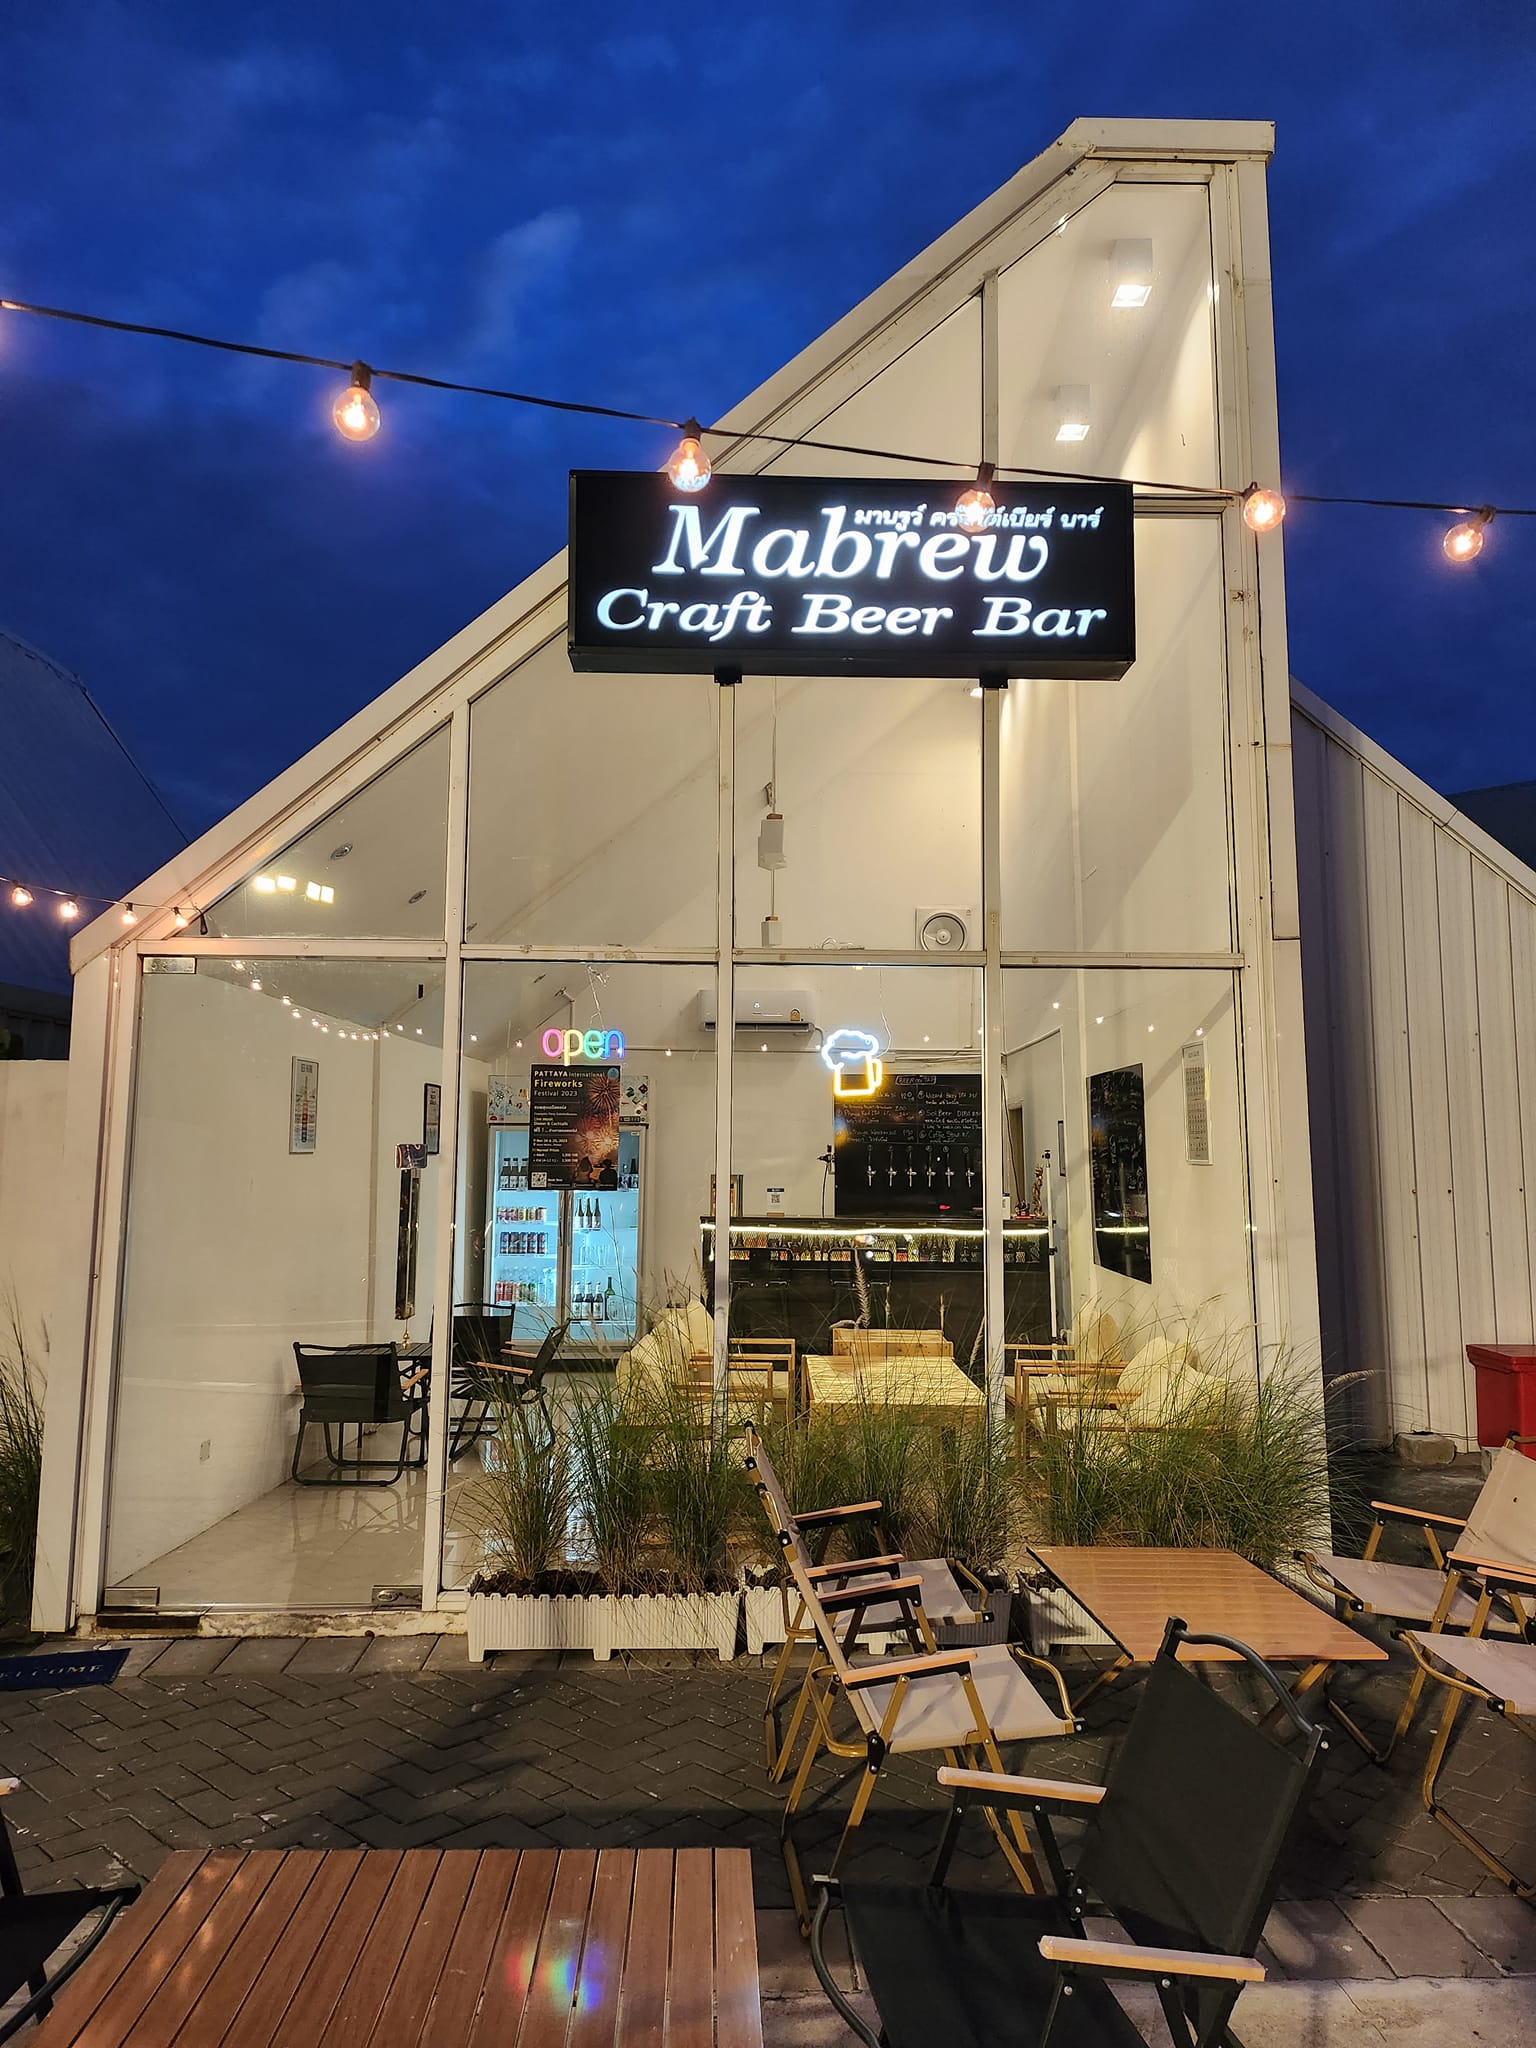 Mabrew Craft Beer (Mabrew Craft Beer) : ปทุมธานี (Pathum Thani)